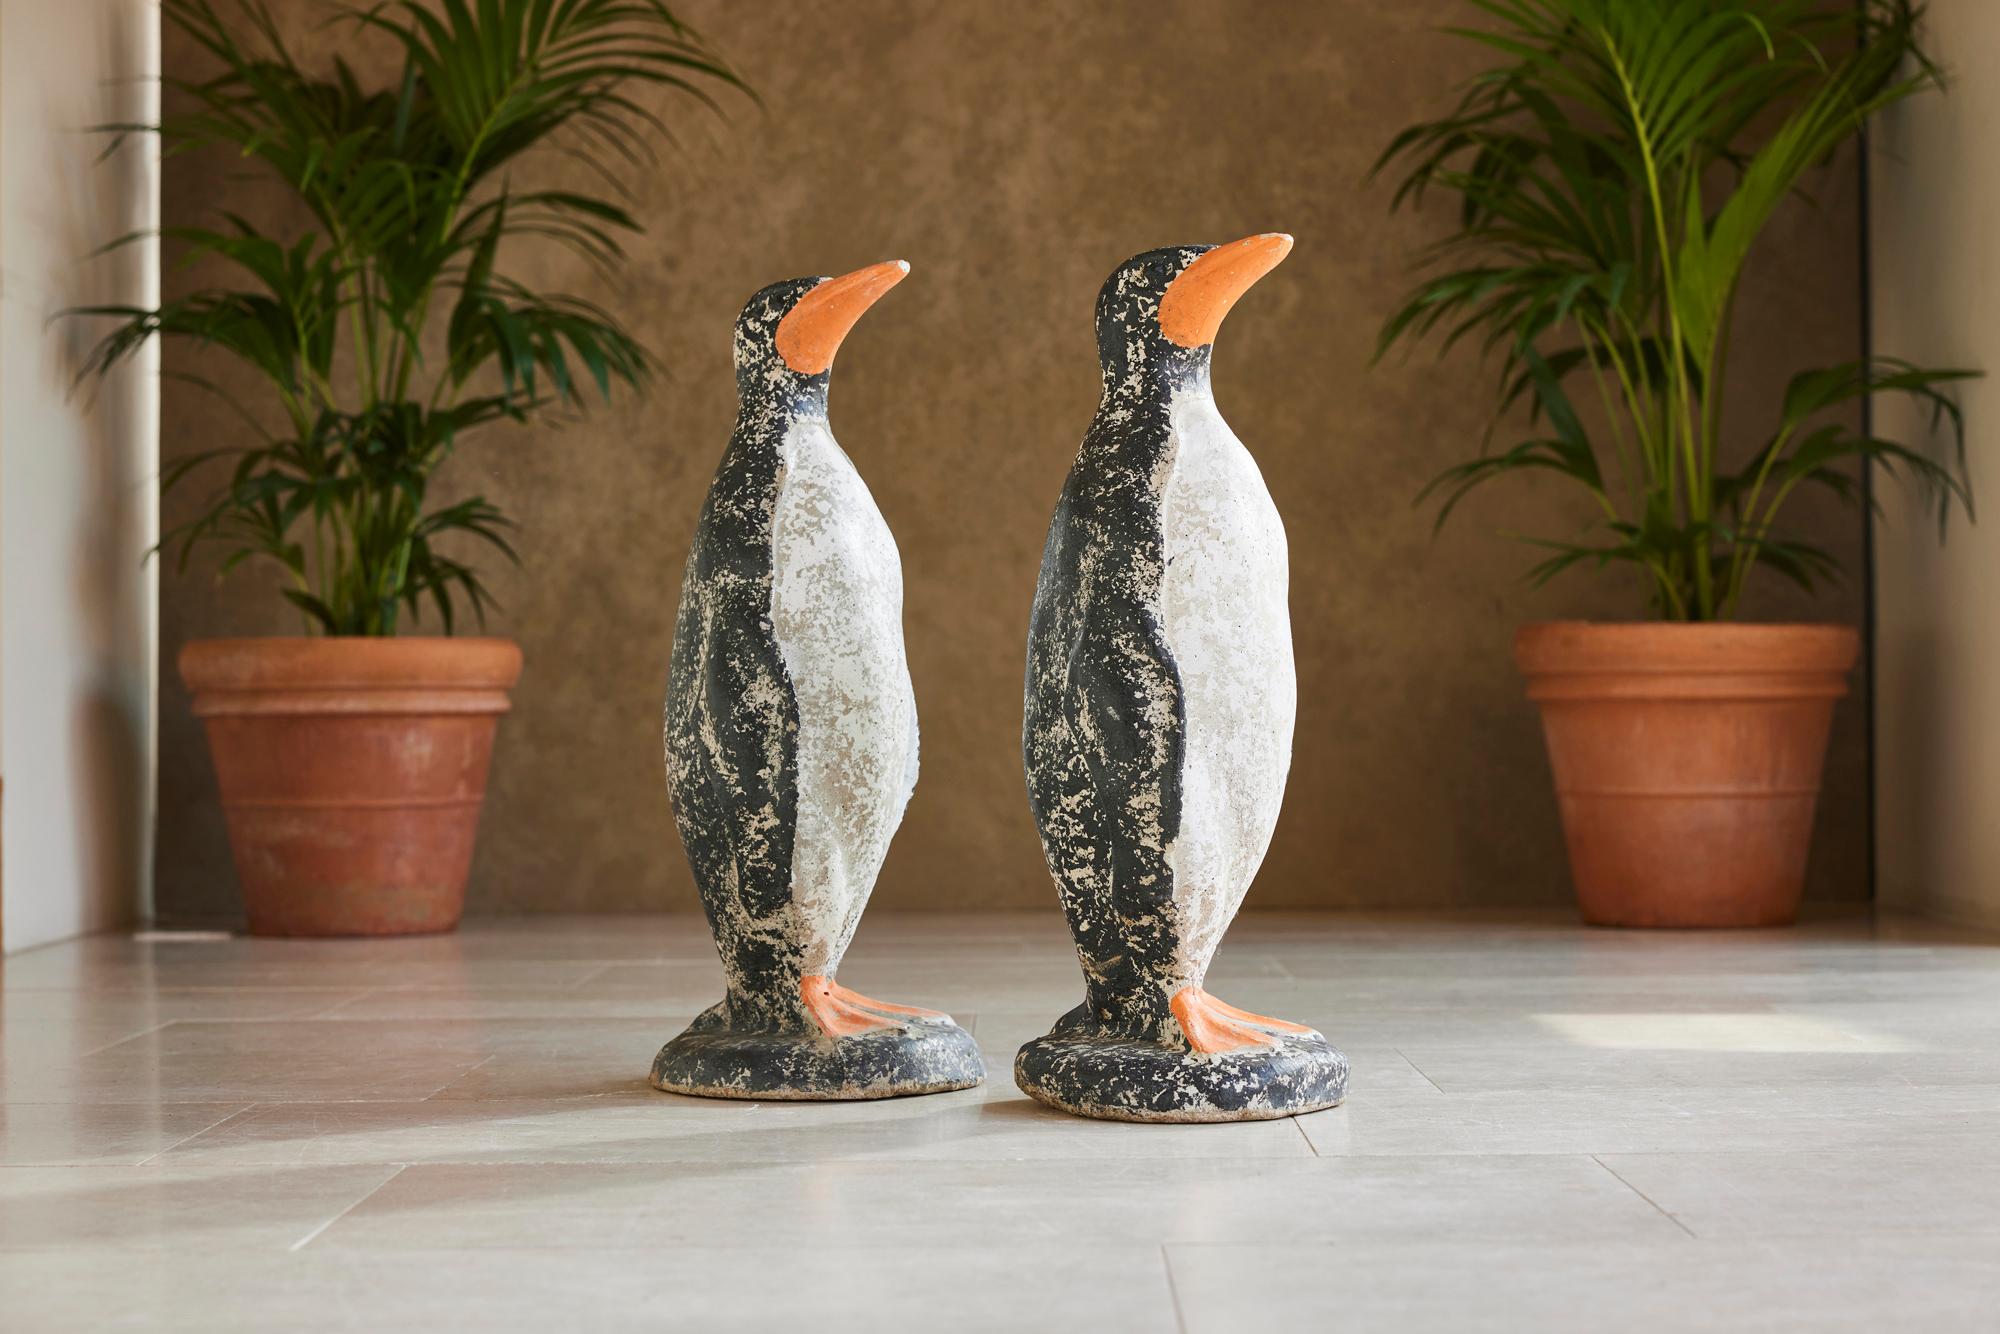 These concrete penguins will appeal to those with a sense of fun and adventure in the garden. We bought them in a market in France because they made us laugh. They are real characters from the 1950s and would look great near a water feature, nestled